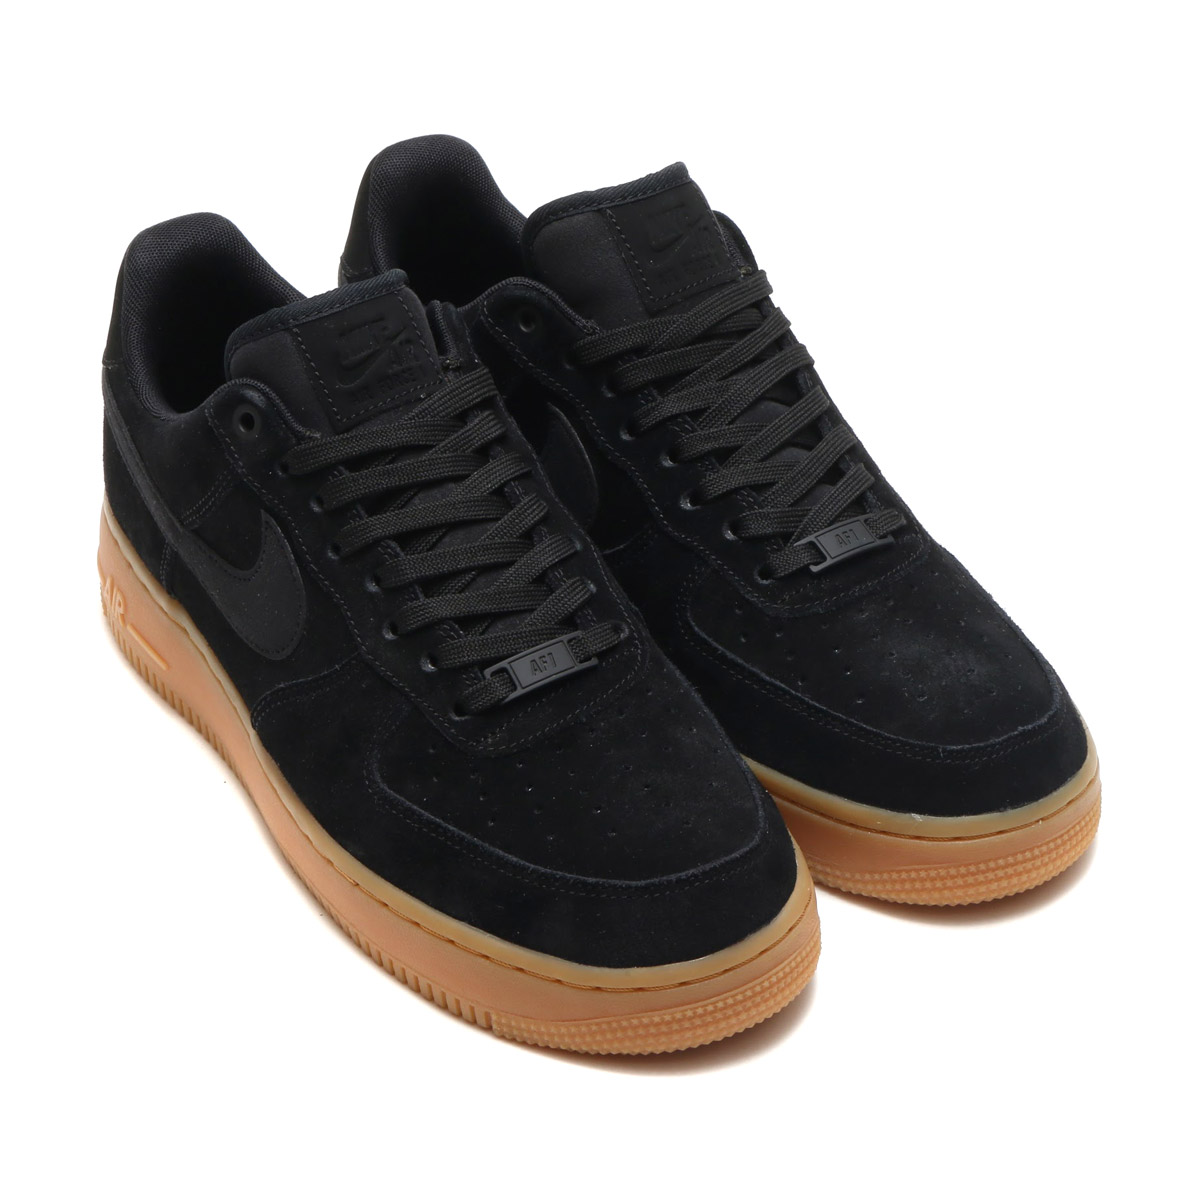 Buy air force 1 lv8 gum sole \u003e up to 39 